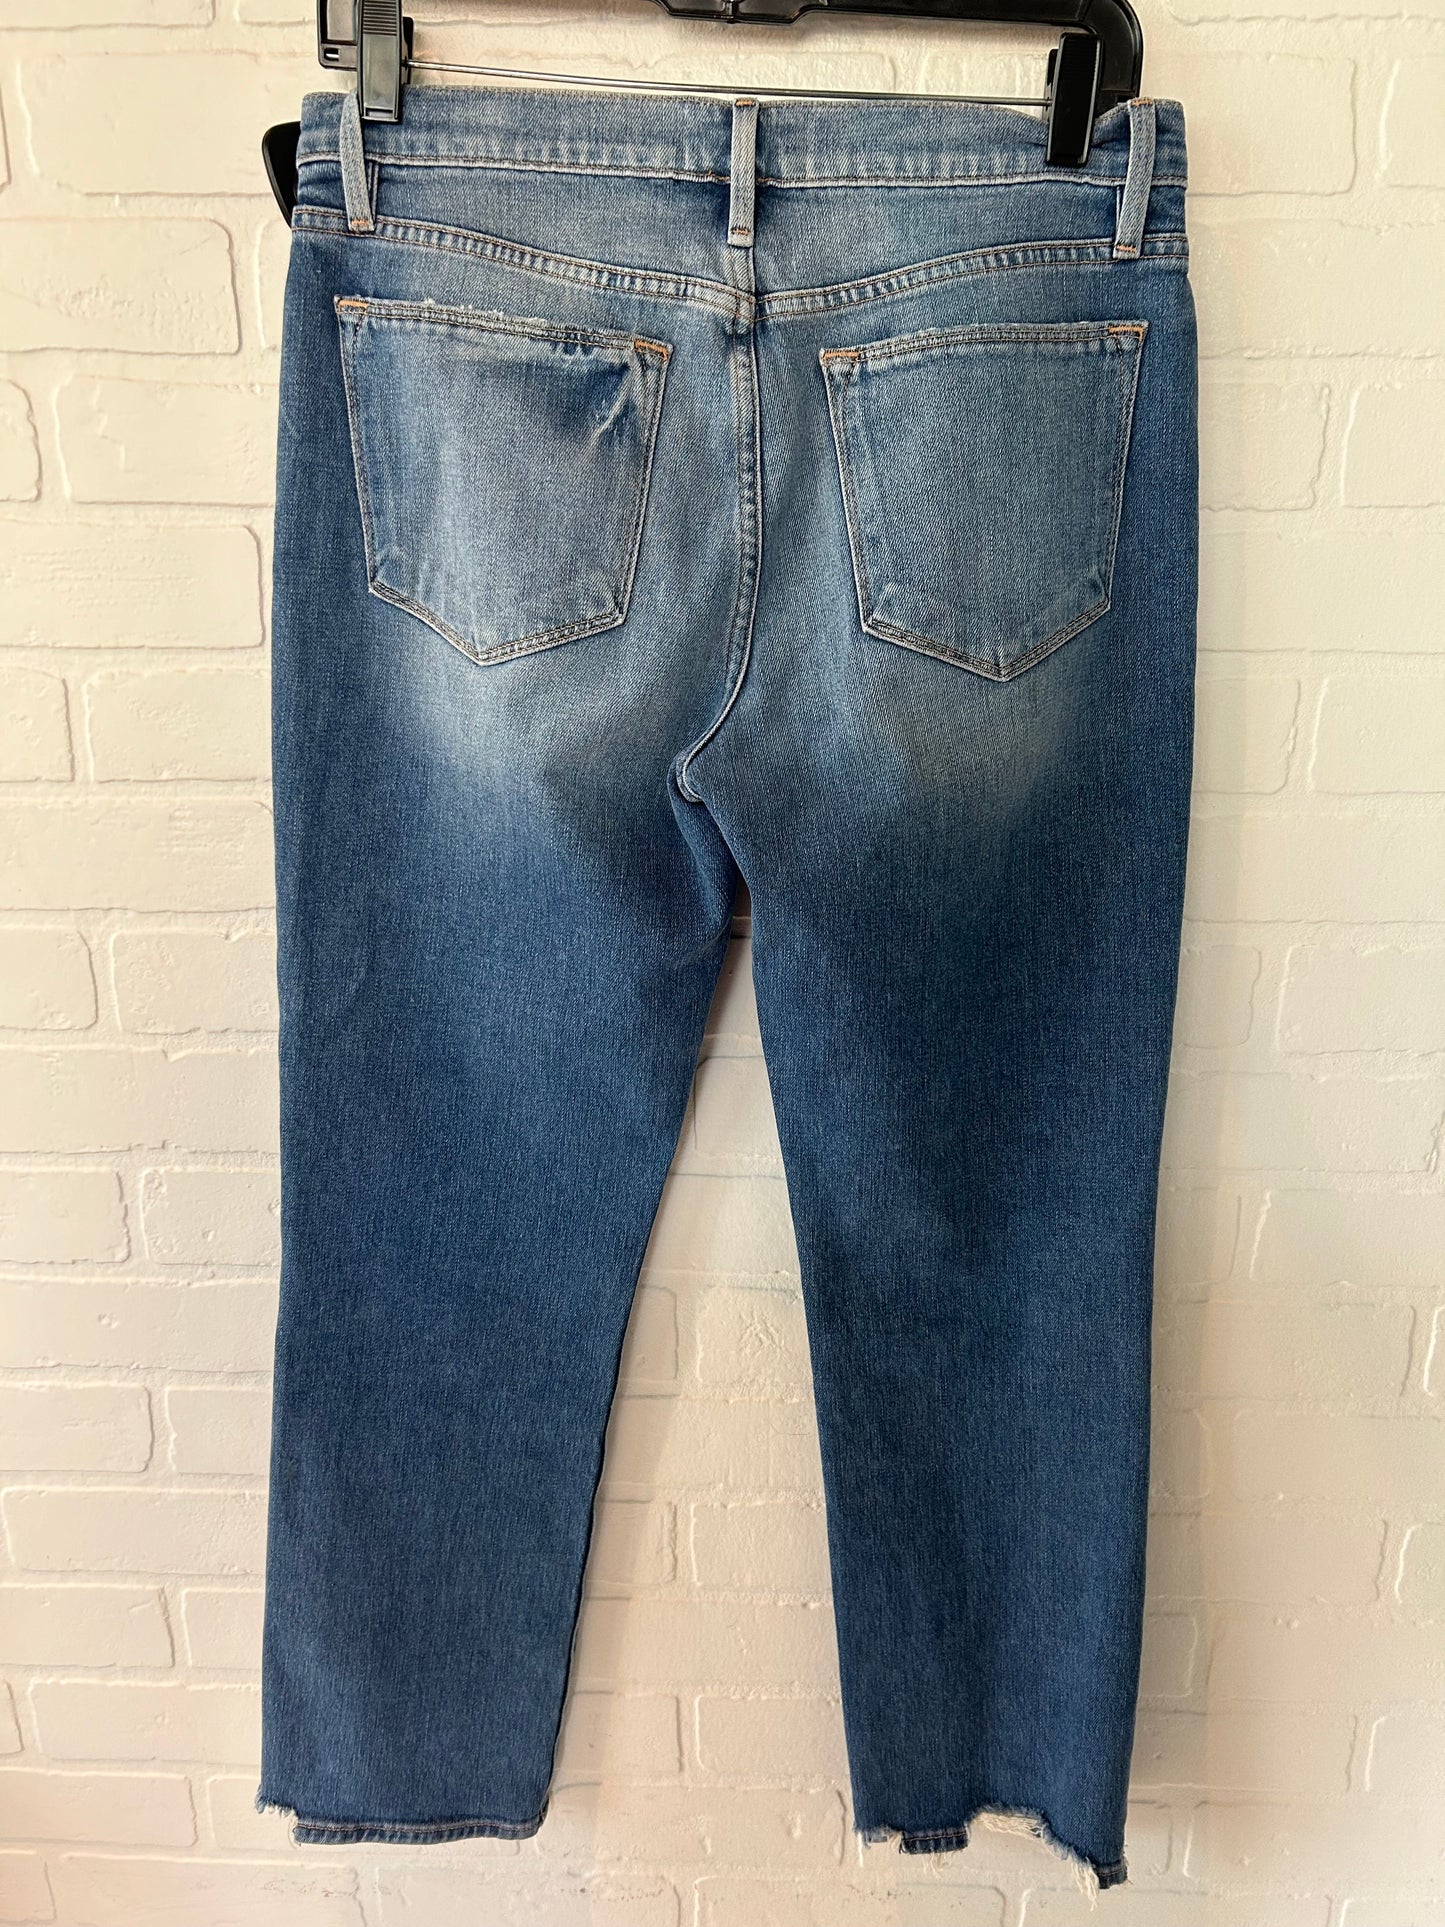 Jeans Straight By Frame  Size: 4